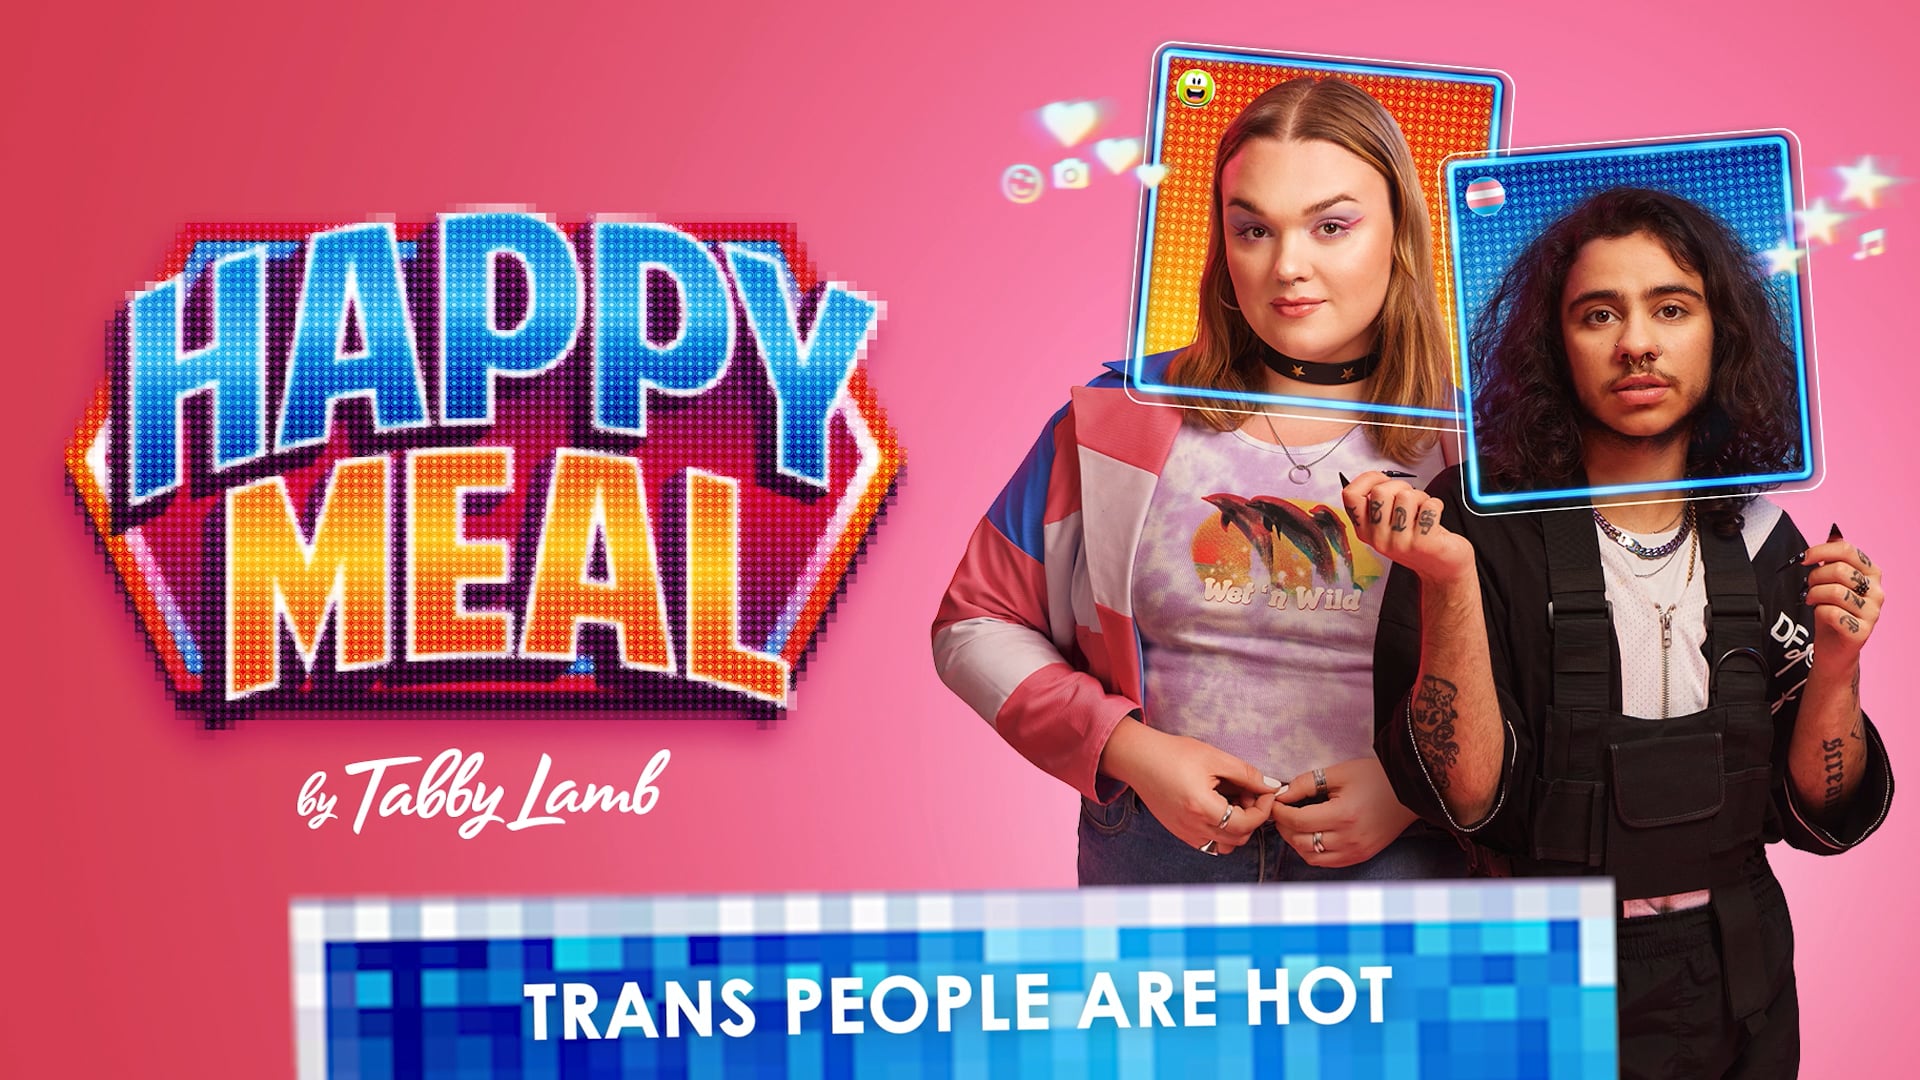 Happy Meal - Trans people are hot